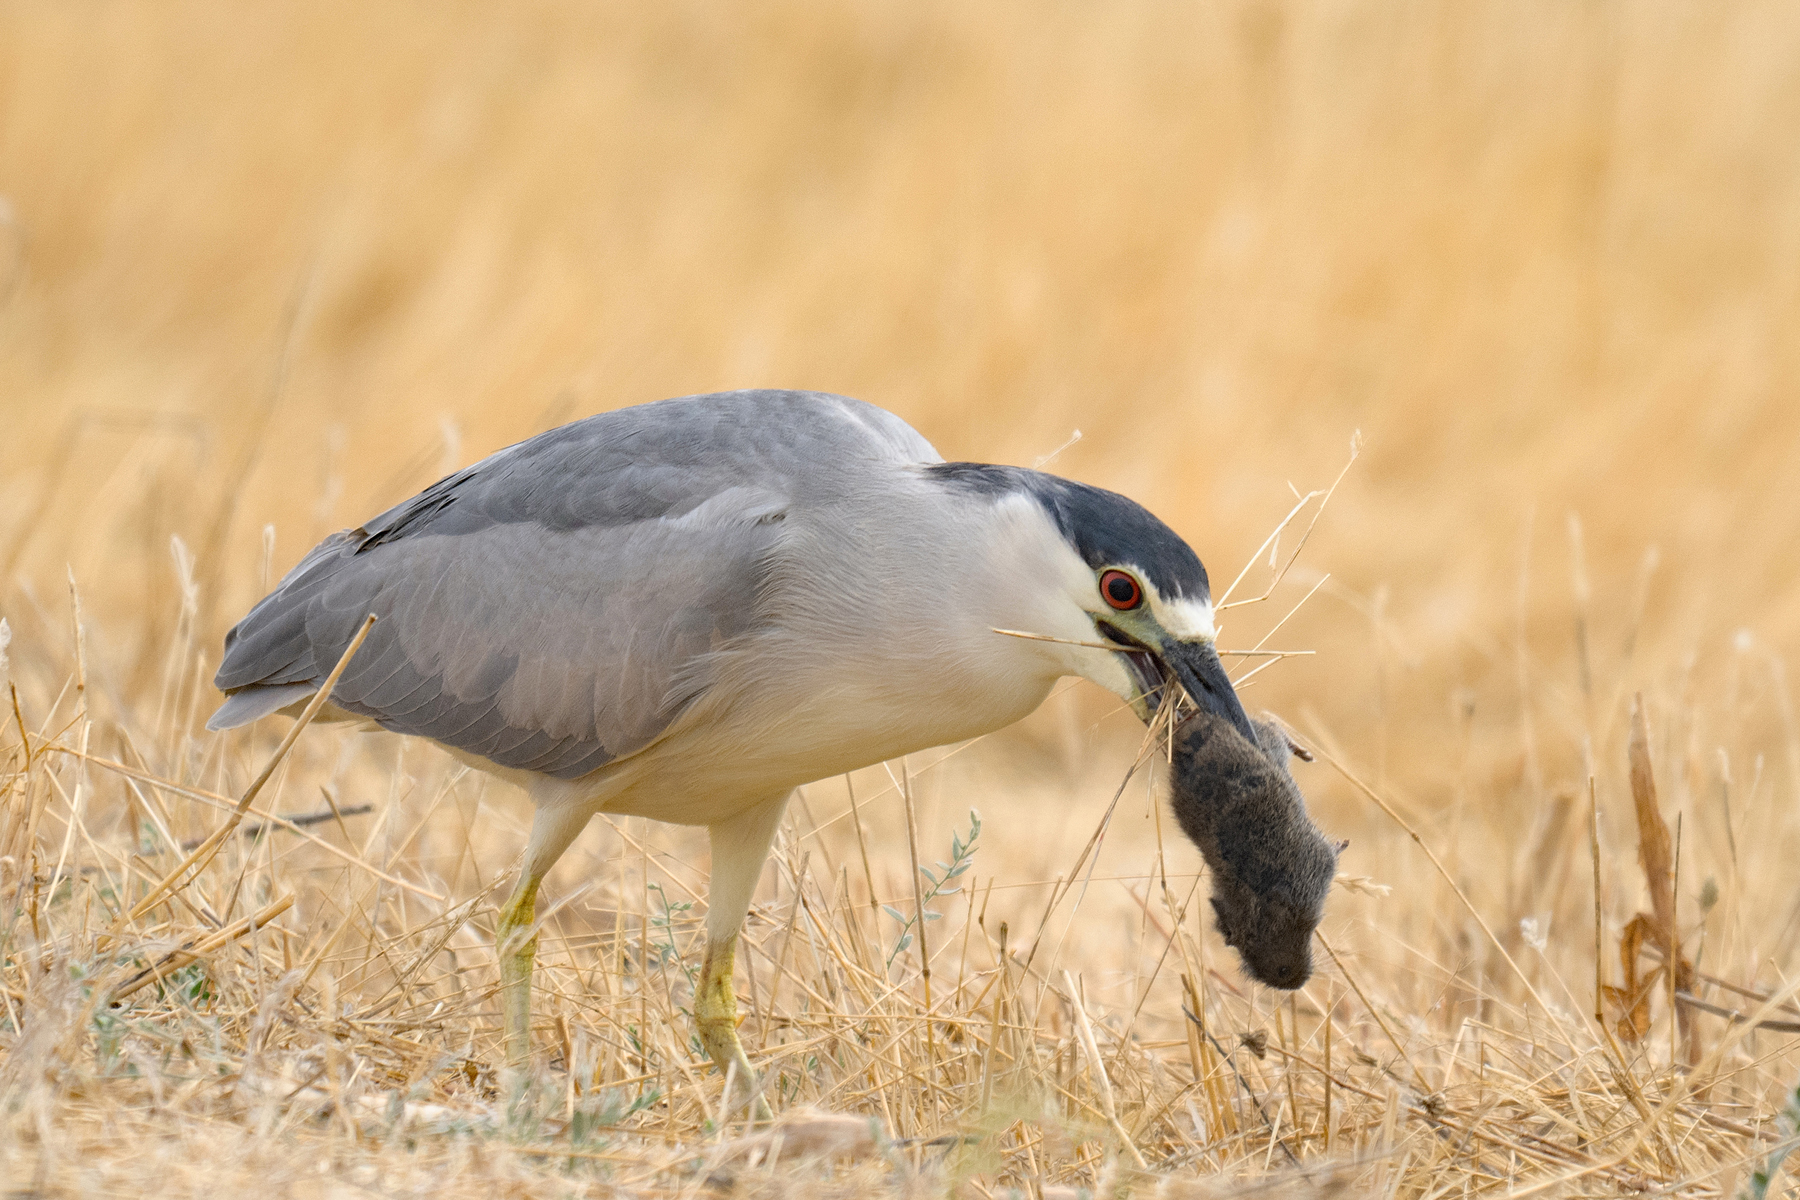 LUNCH TIME FOR A NIGHT HERON backcountry gallery _DSC3743.jpg